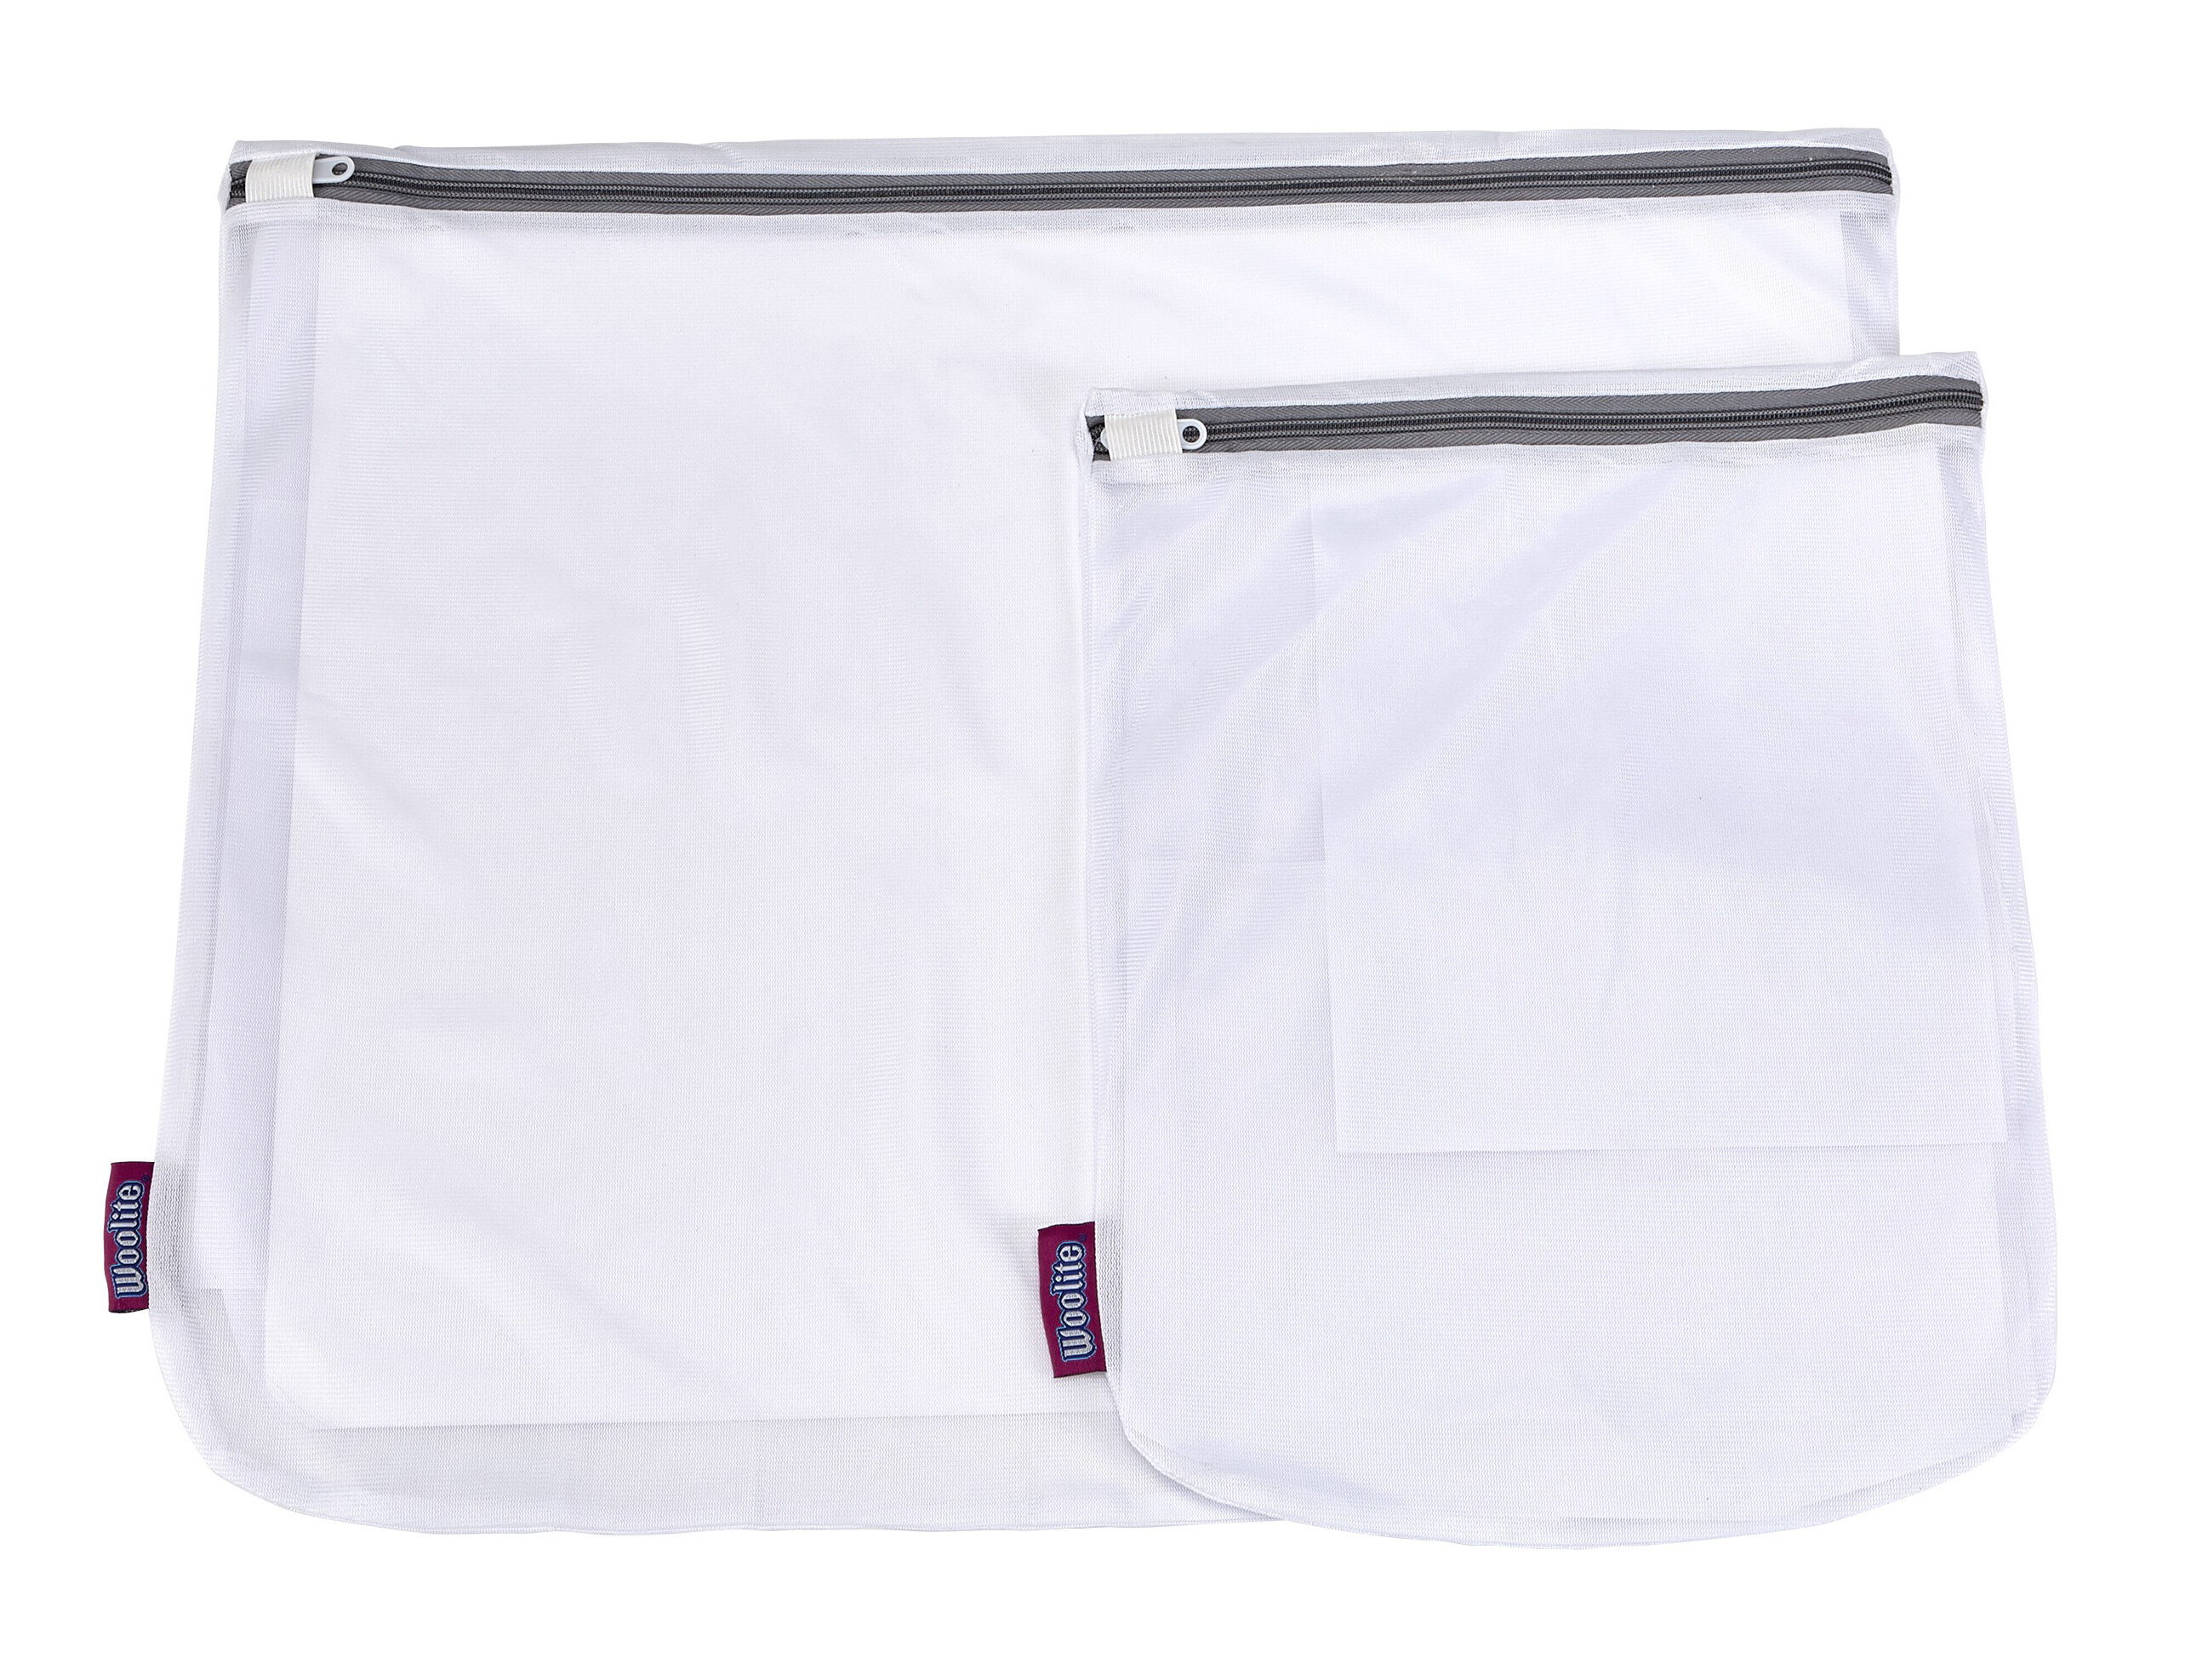 Woolite 4 Compartment Hosiery Wash Laundry Bag for sale online 